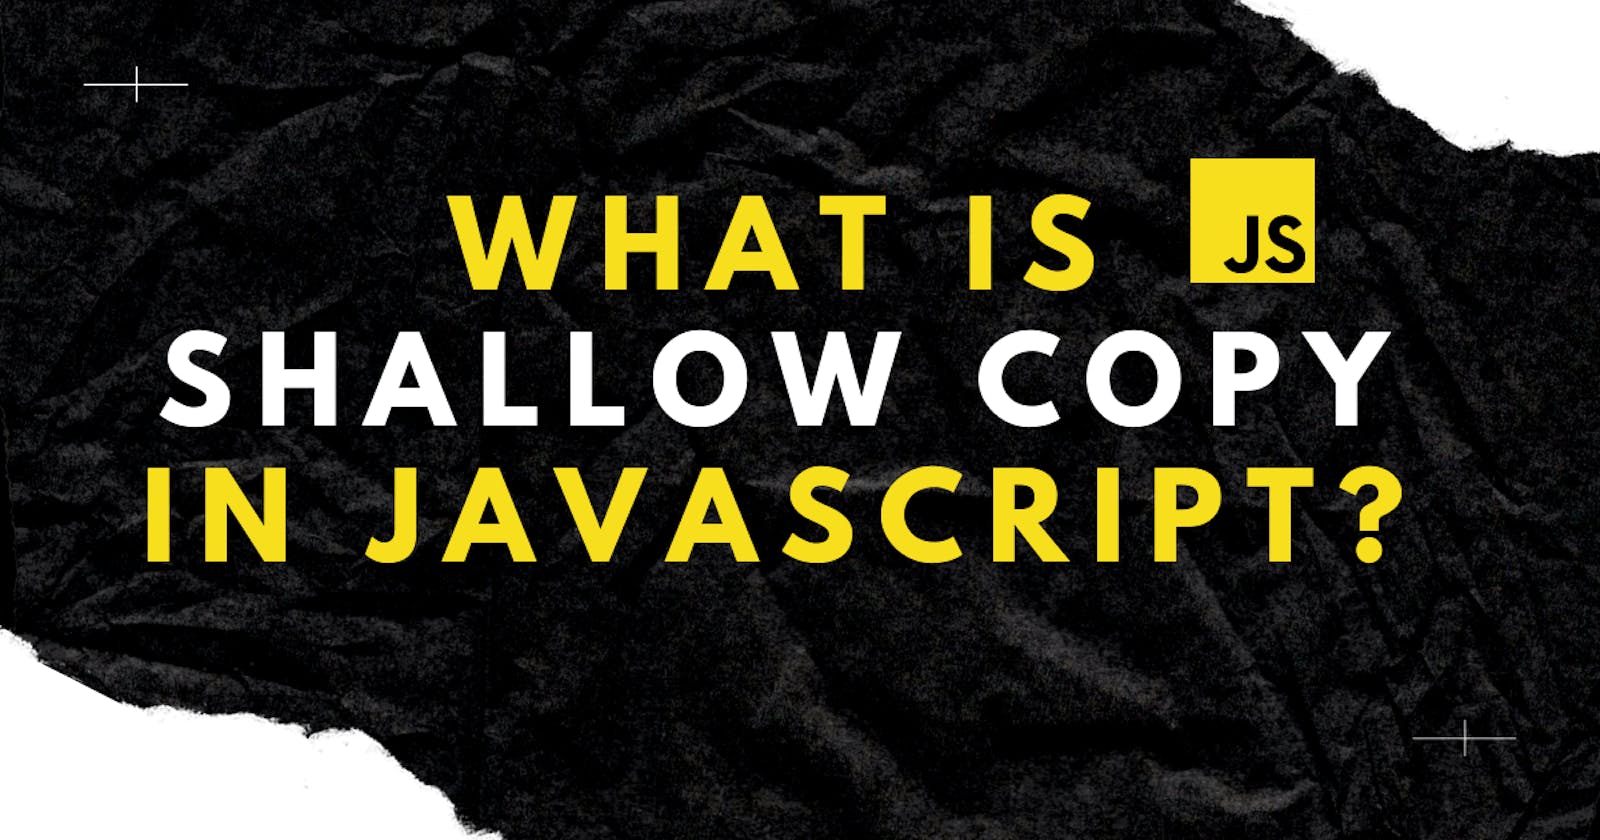 What is Shallow Copy in JavaScript?